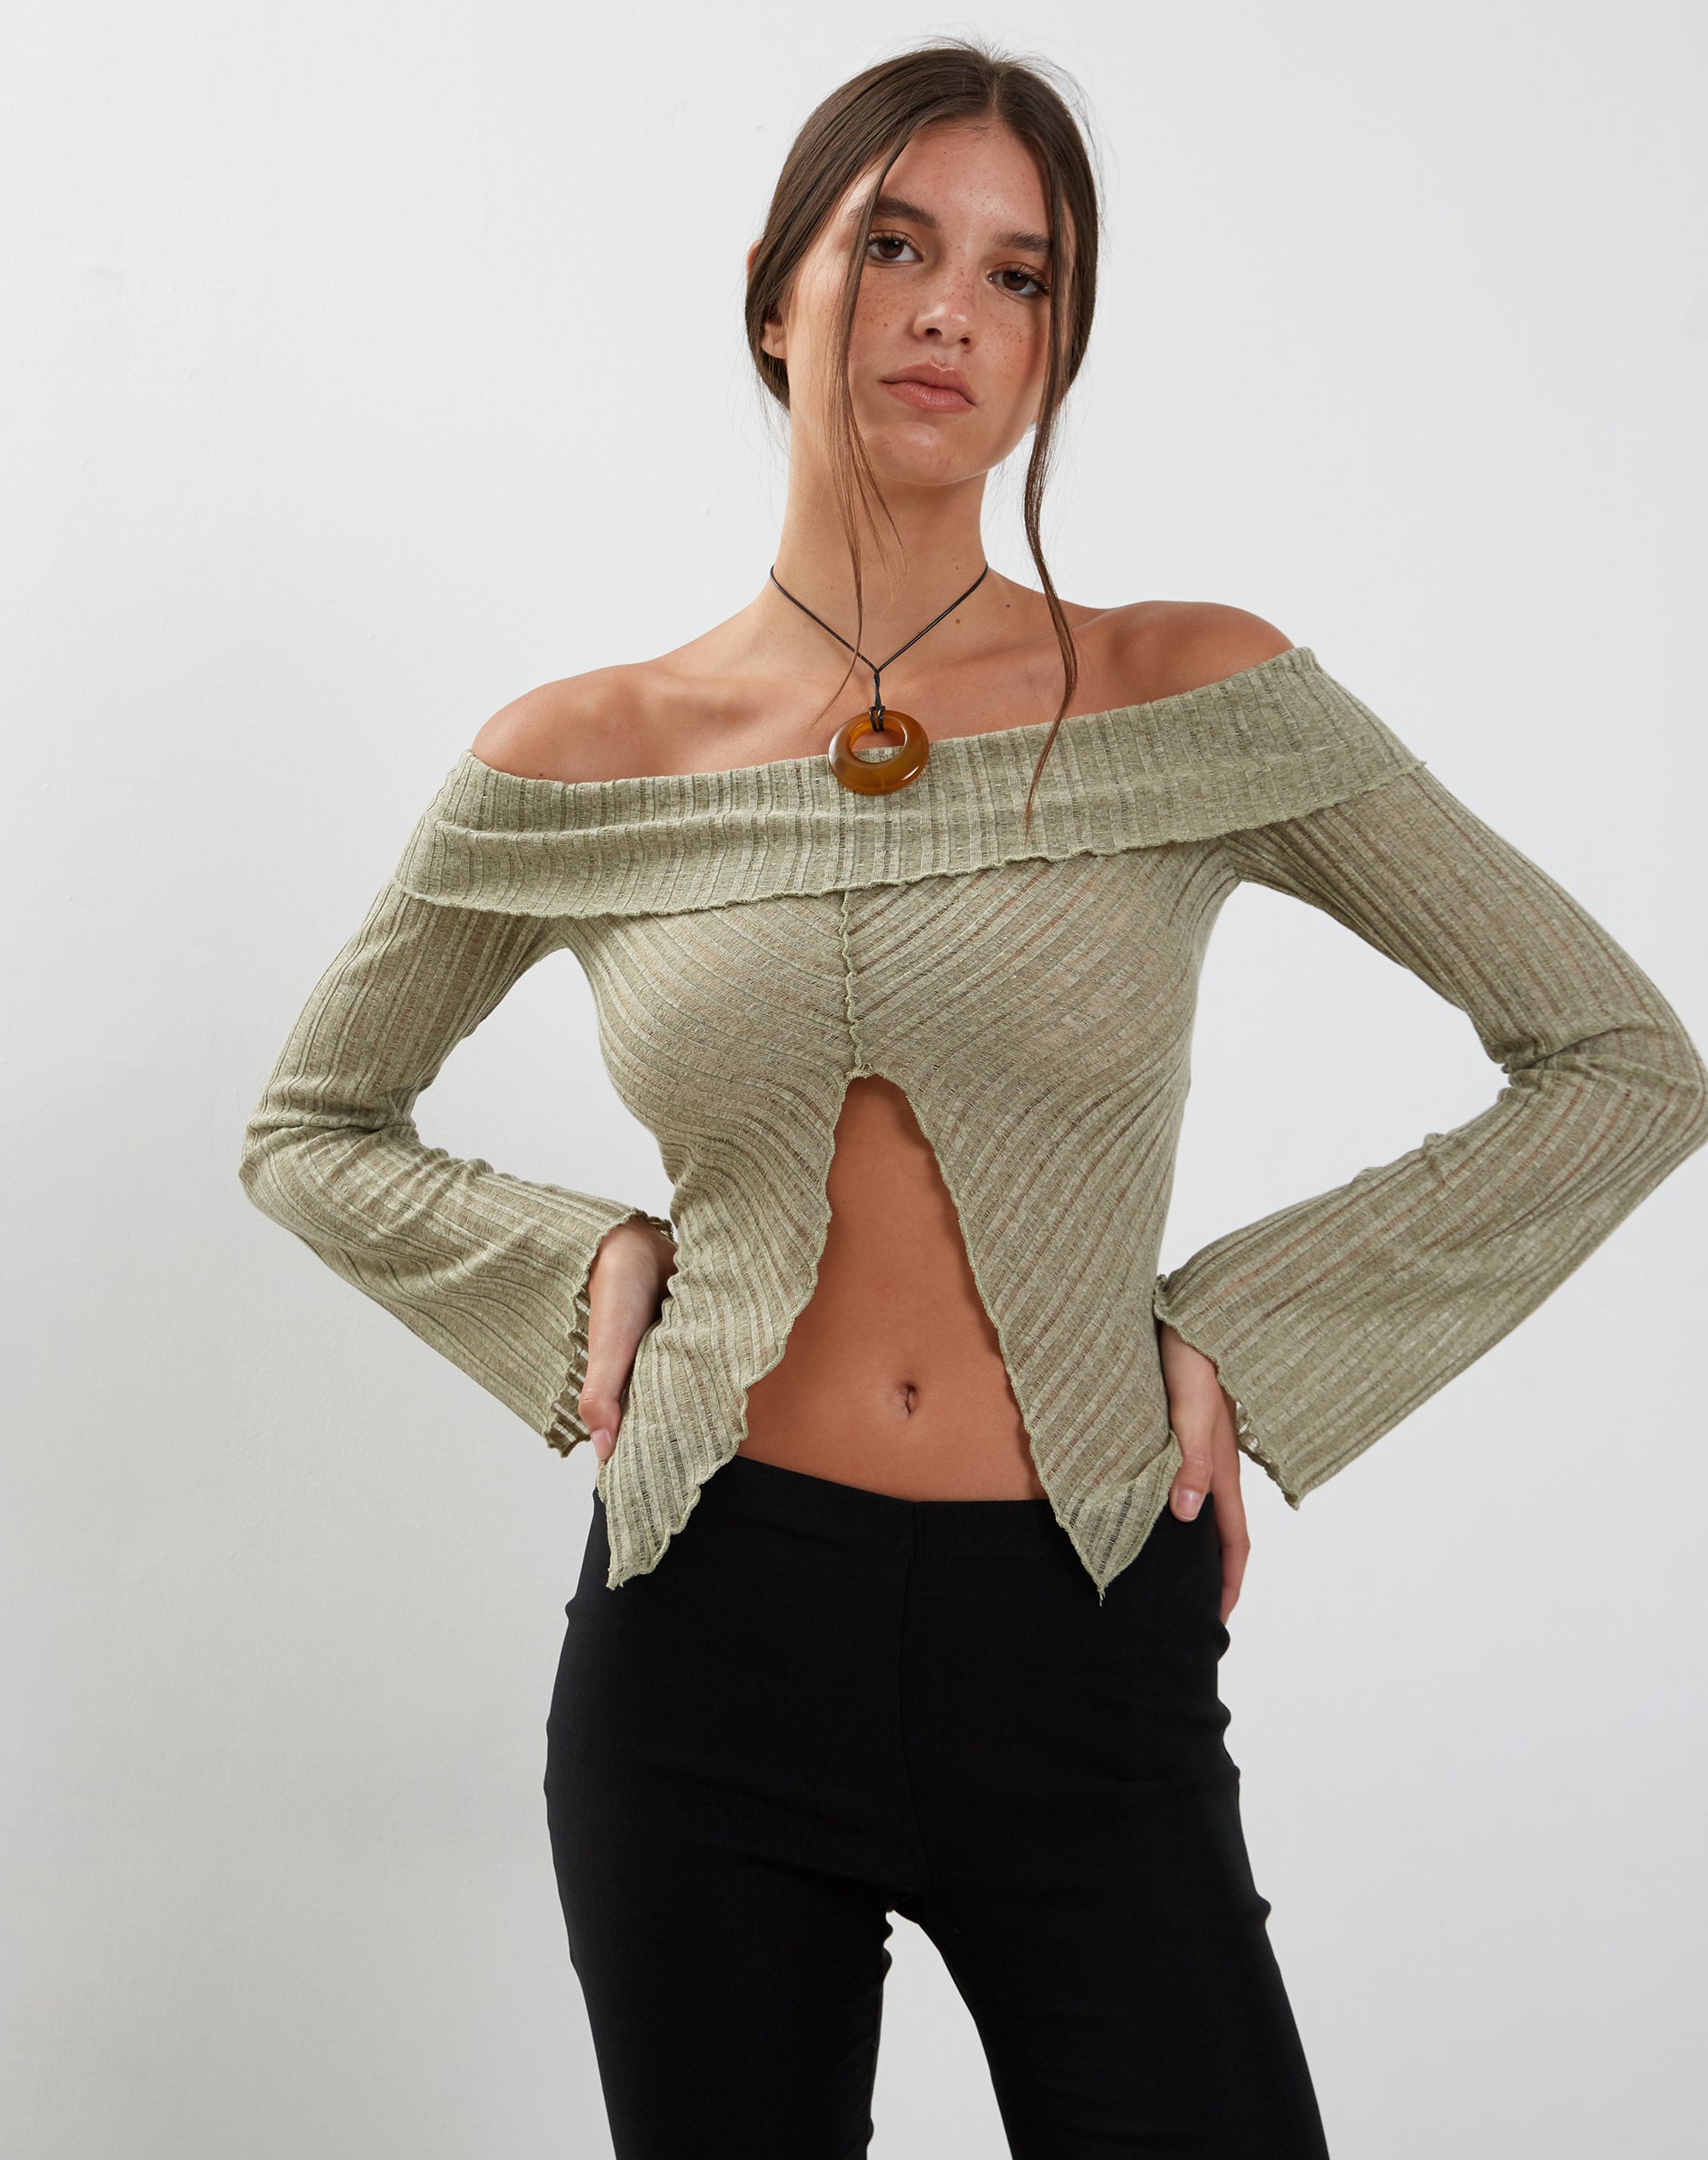 Image of Celeste Long Sleeve Bardot Knitted Top in Sage